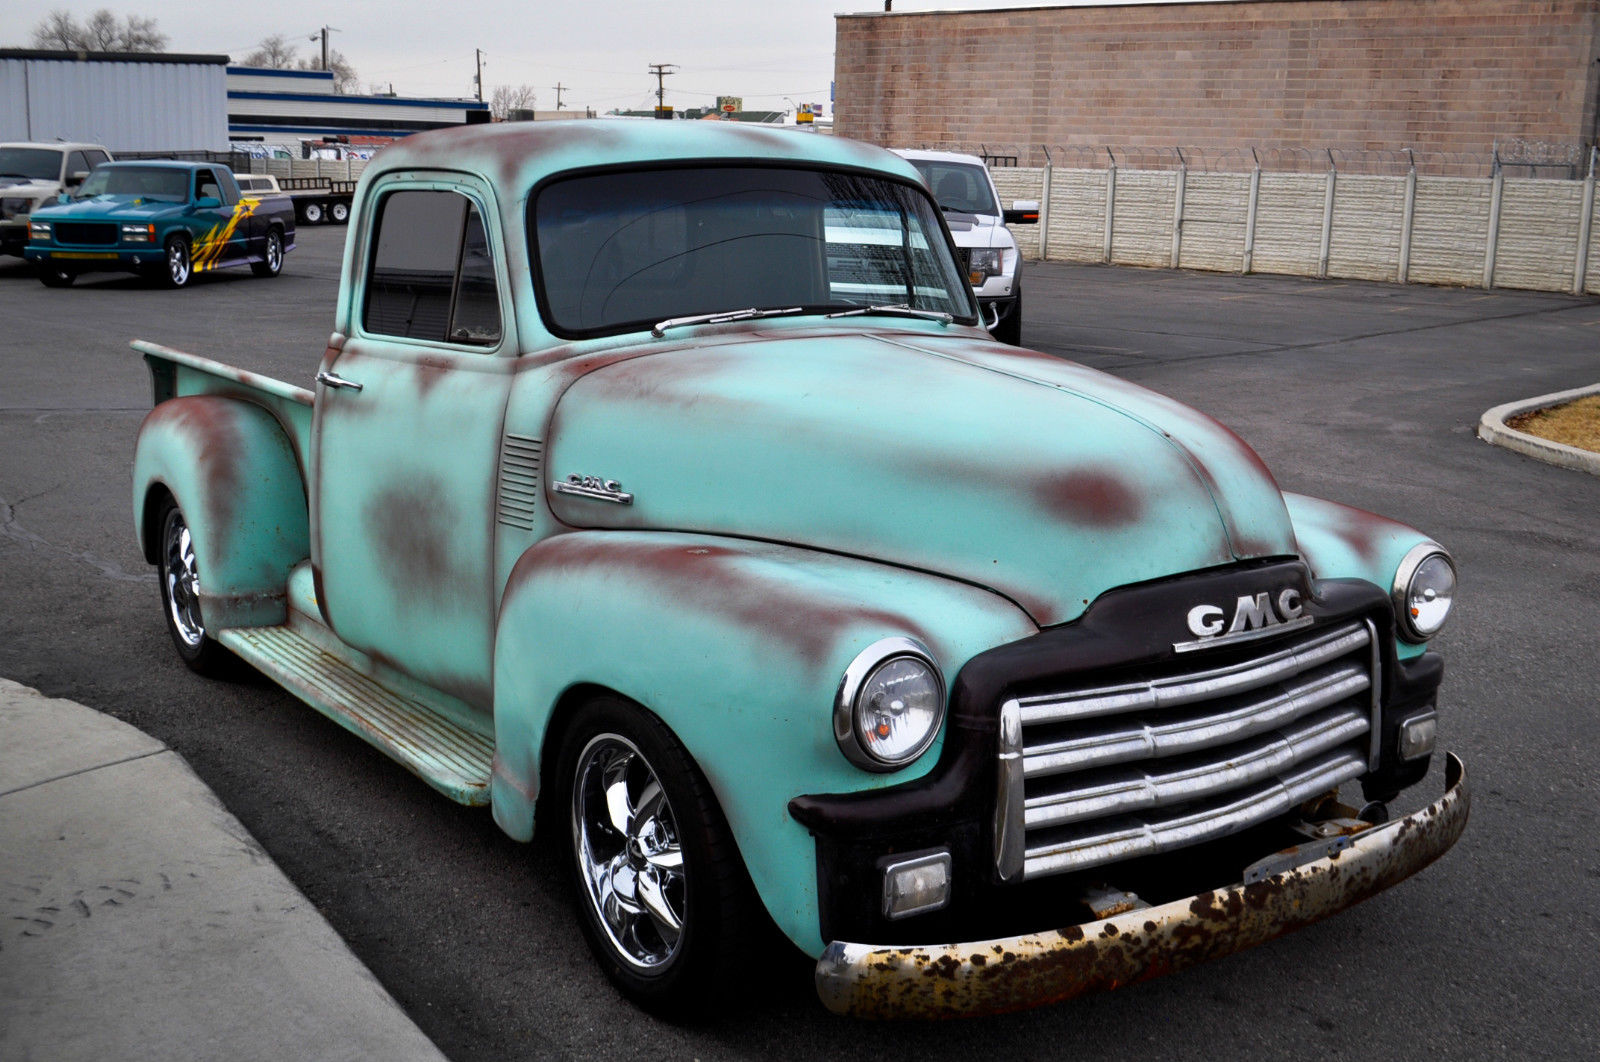 1954 GMC Truck RestoMod for sale in Salt Lake City, Utah, United States for sale: photos ...